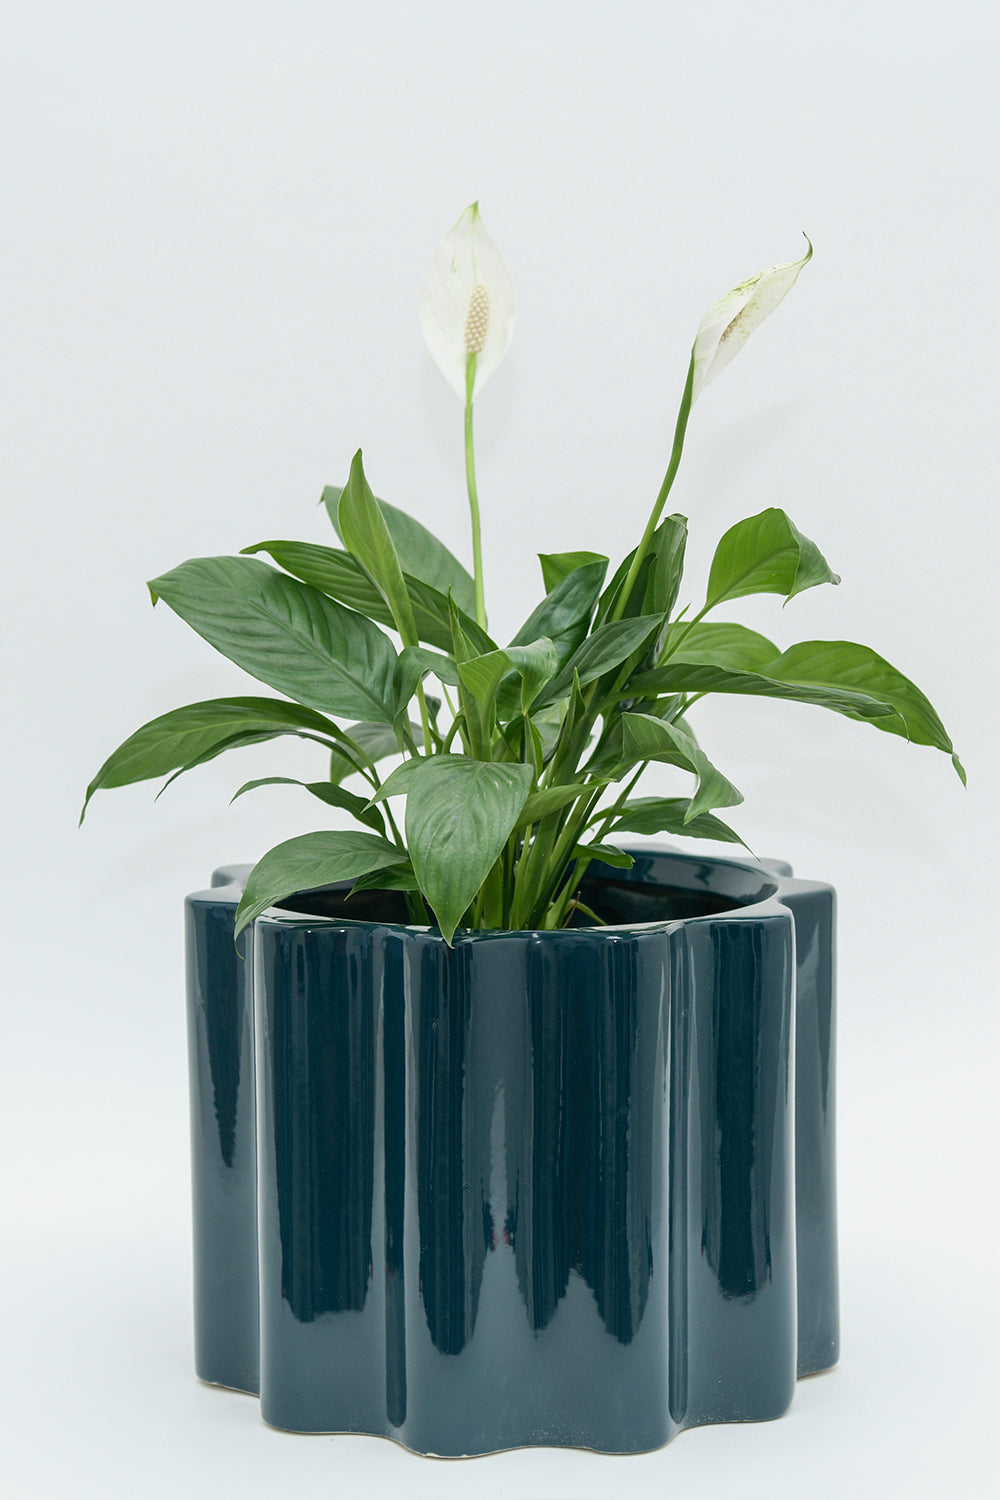 Large Size Balmy Waves Ceramic Pot in Midnight Blue colour with a Peacelily Plant